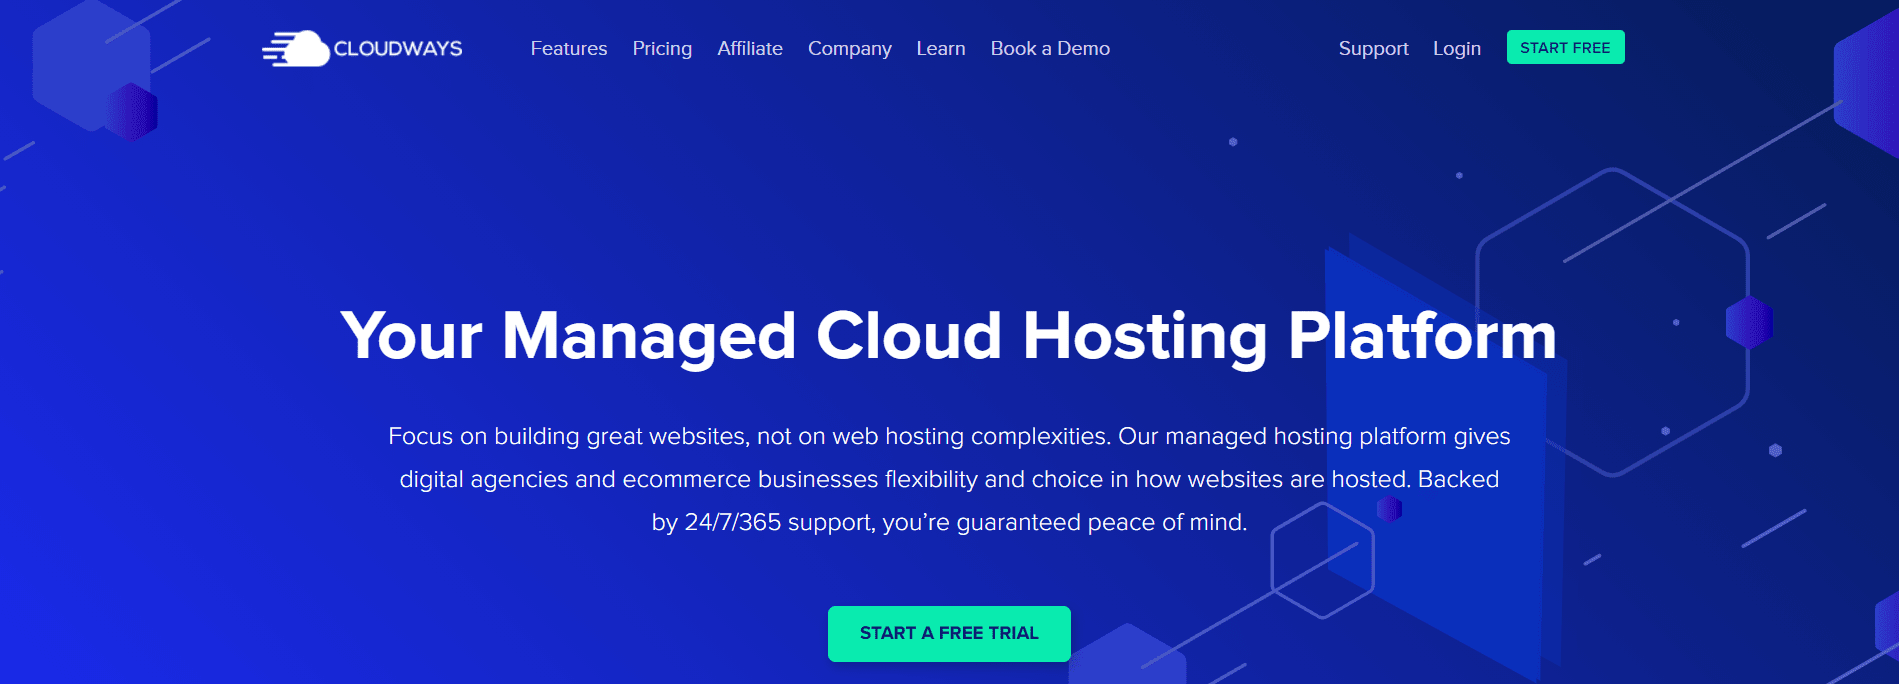 Cloudways-Overview